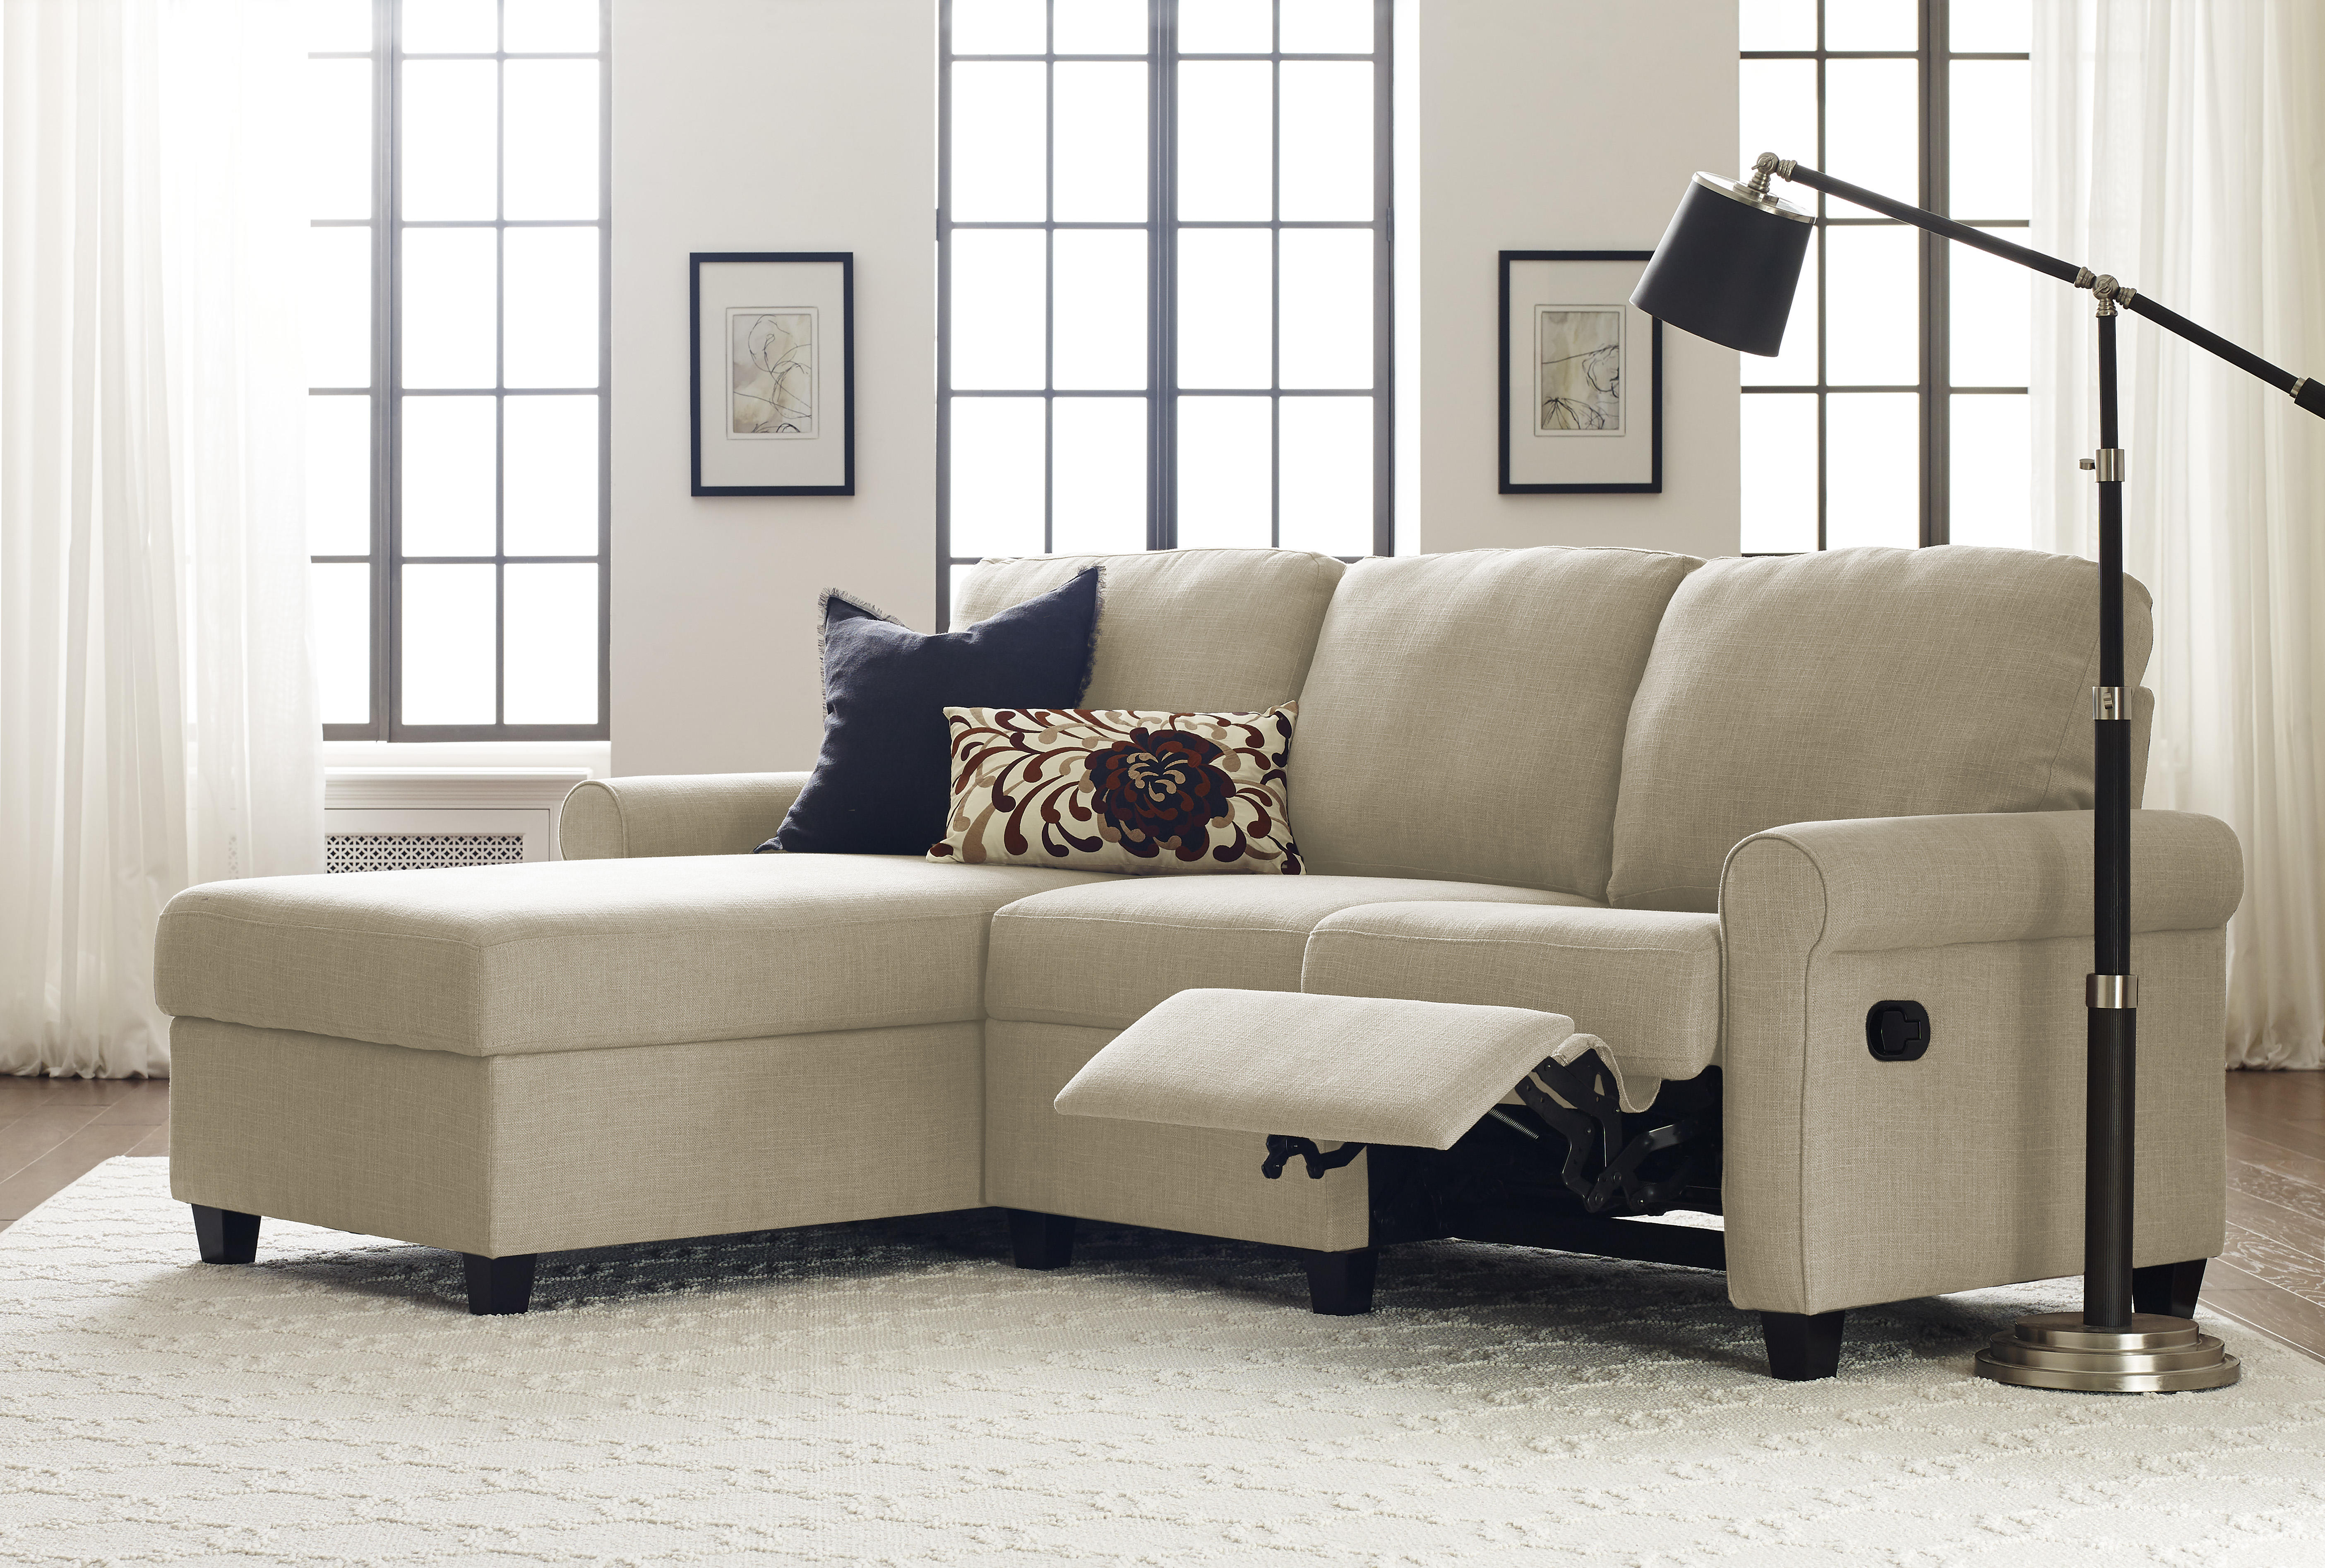 Serta Copenhagen Reclining Sectional with Left Storage Chaise - Oatmeal - image 1 of 9